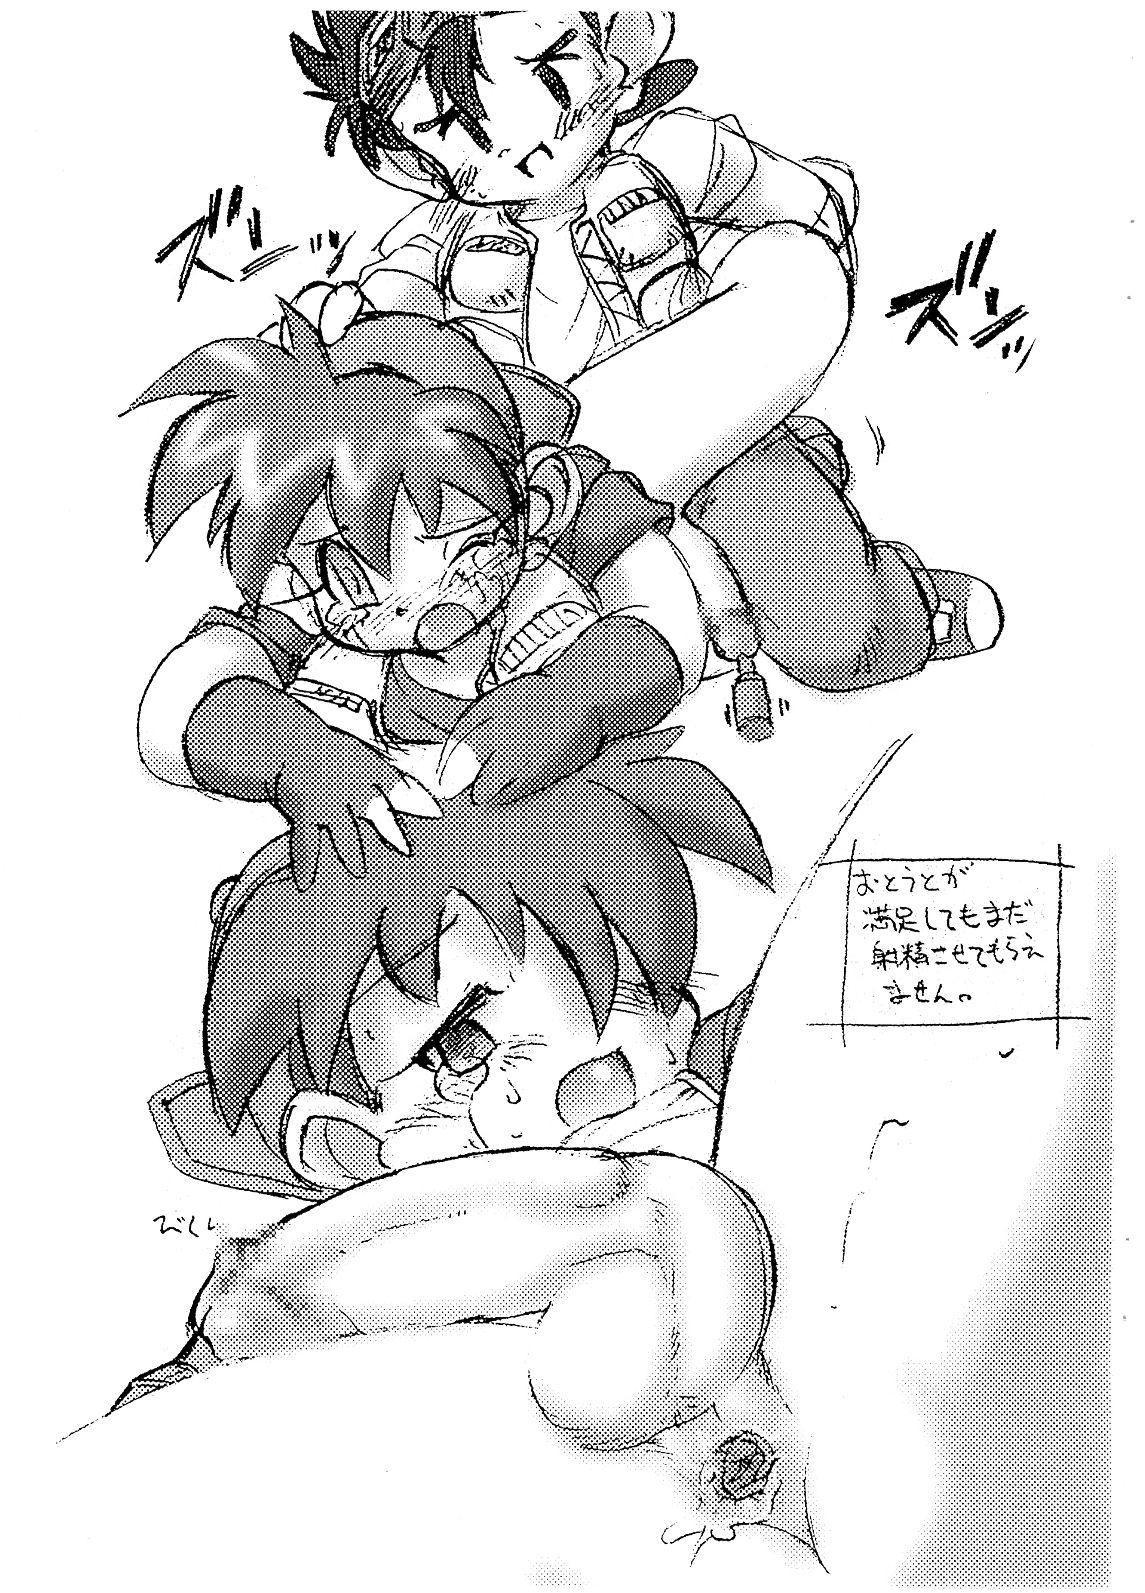 Jerking Off TOUCH DASH! + Omake - The legend of zelda Bakusou kyoudai lets and go Maid - Page 4